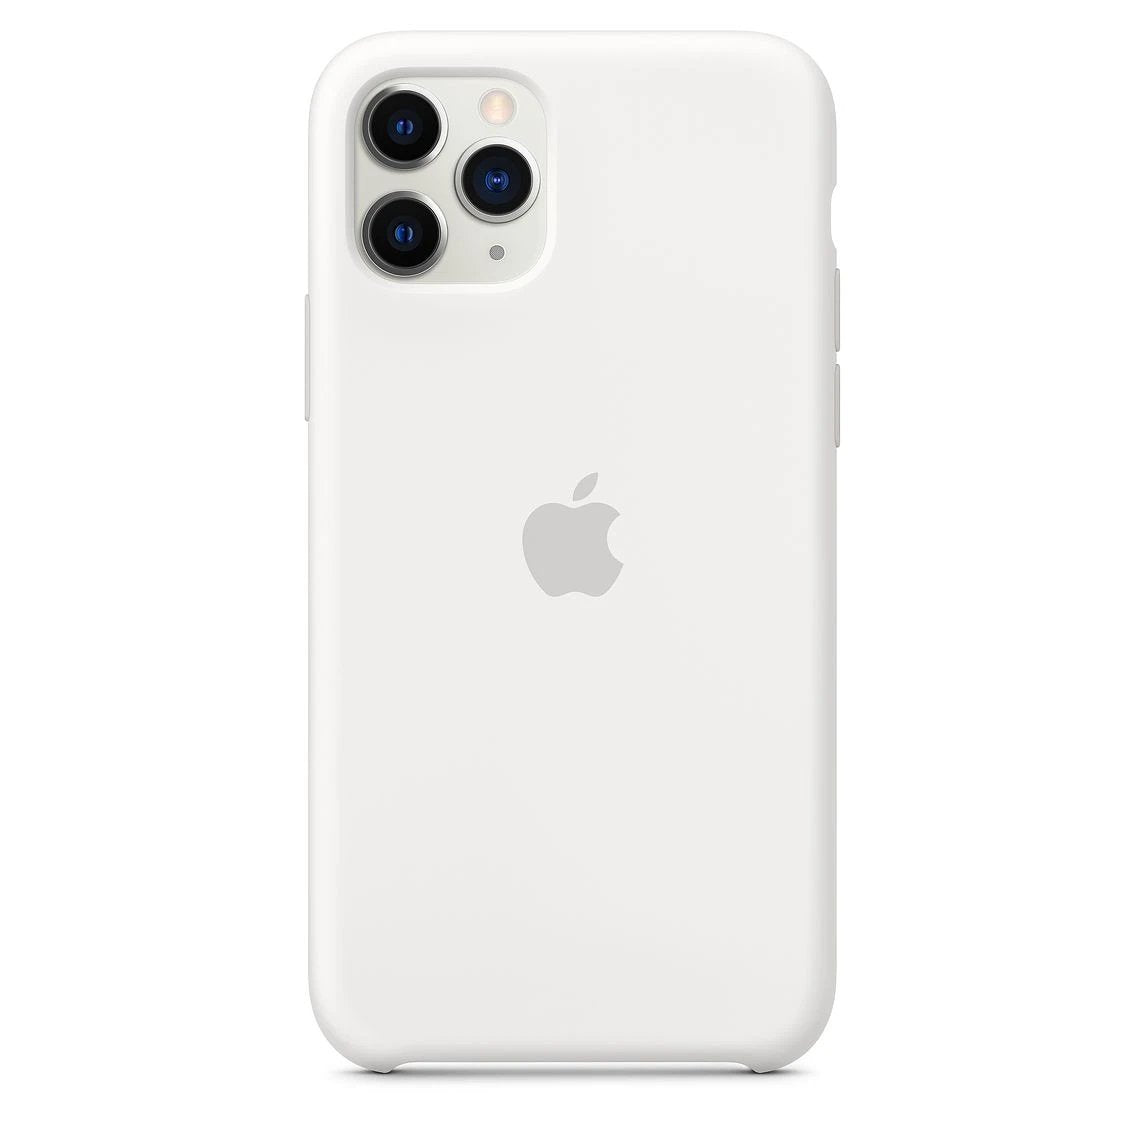 Silicon Case For iPhone 11 Pro Max - White - Mobilegadgets360